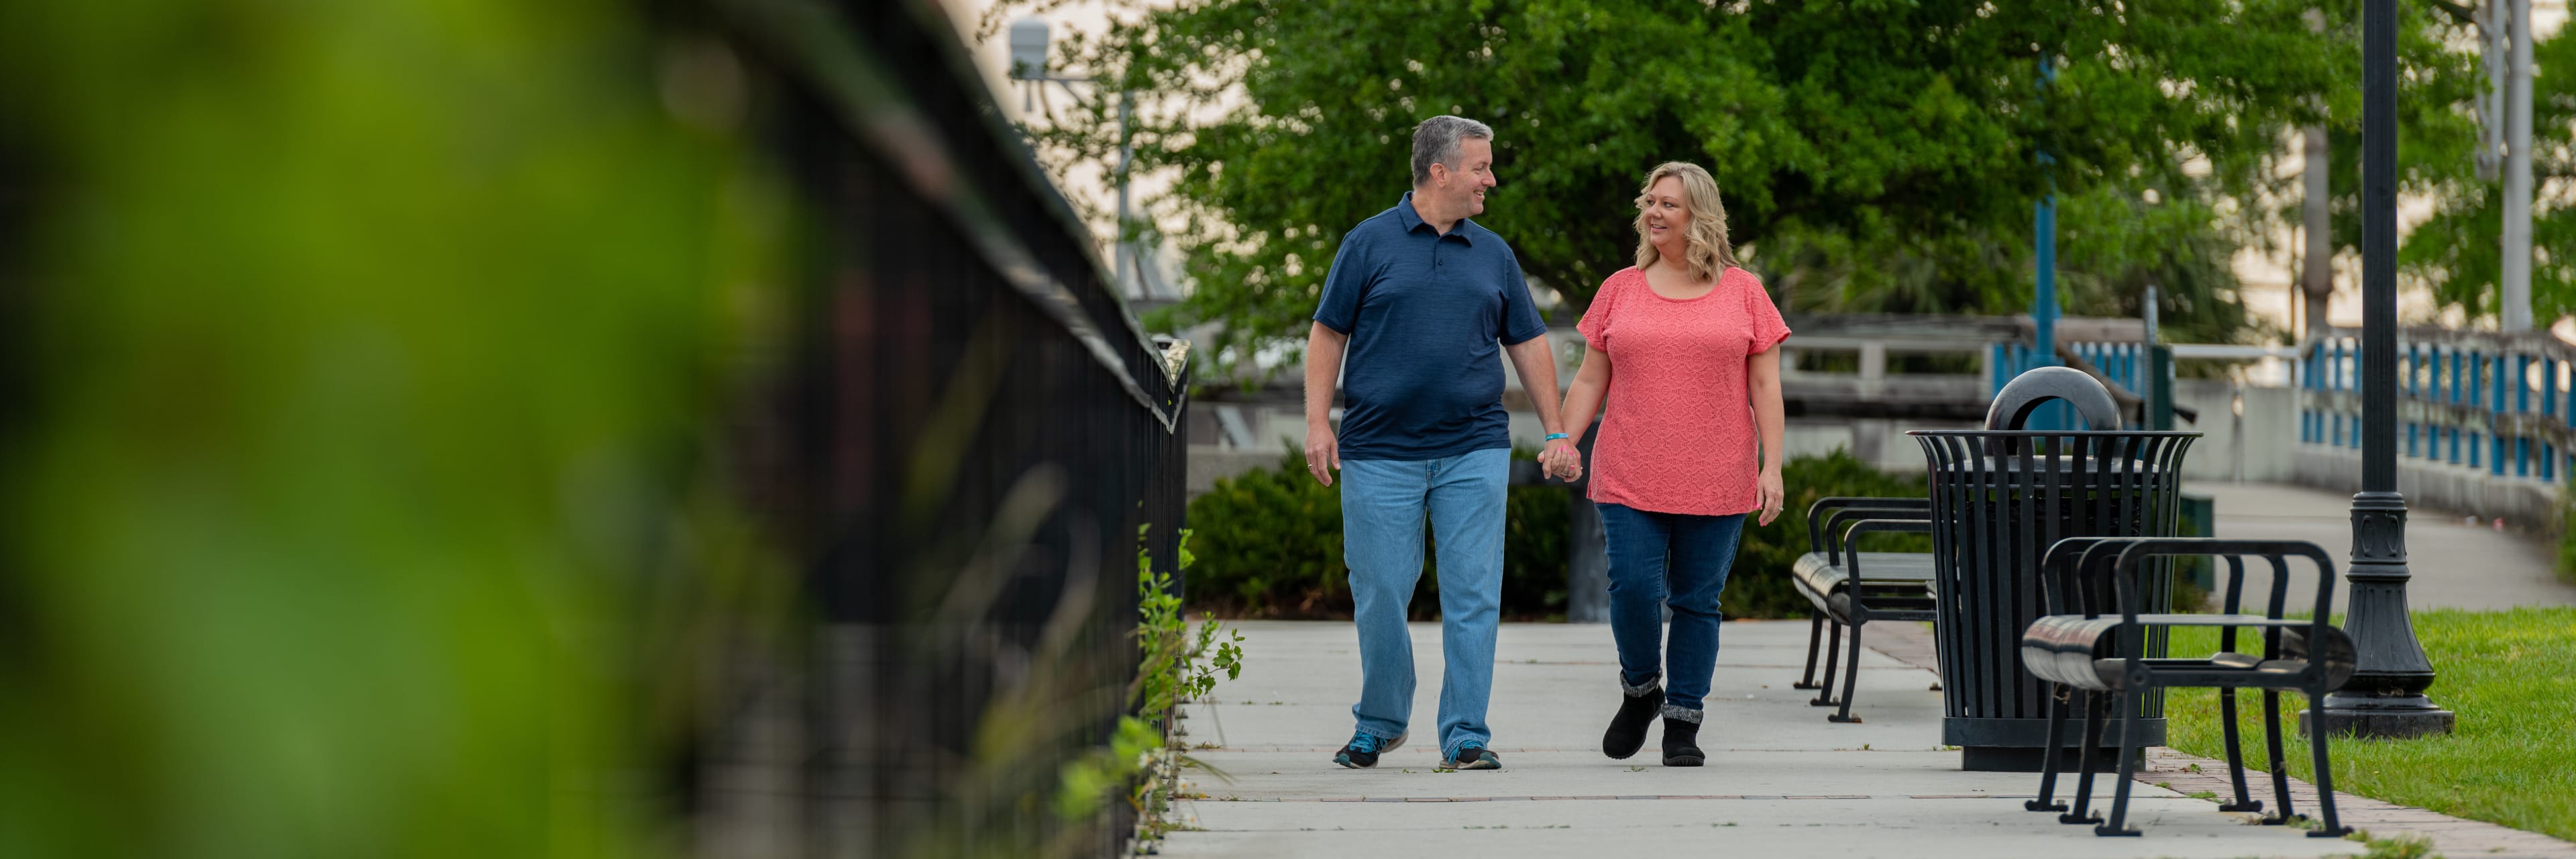 Jacksonville couple that had bariatric surgery happily walking in a park holding hands.